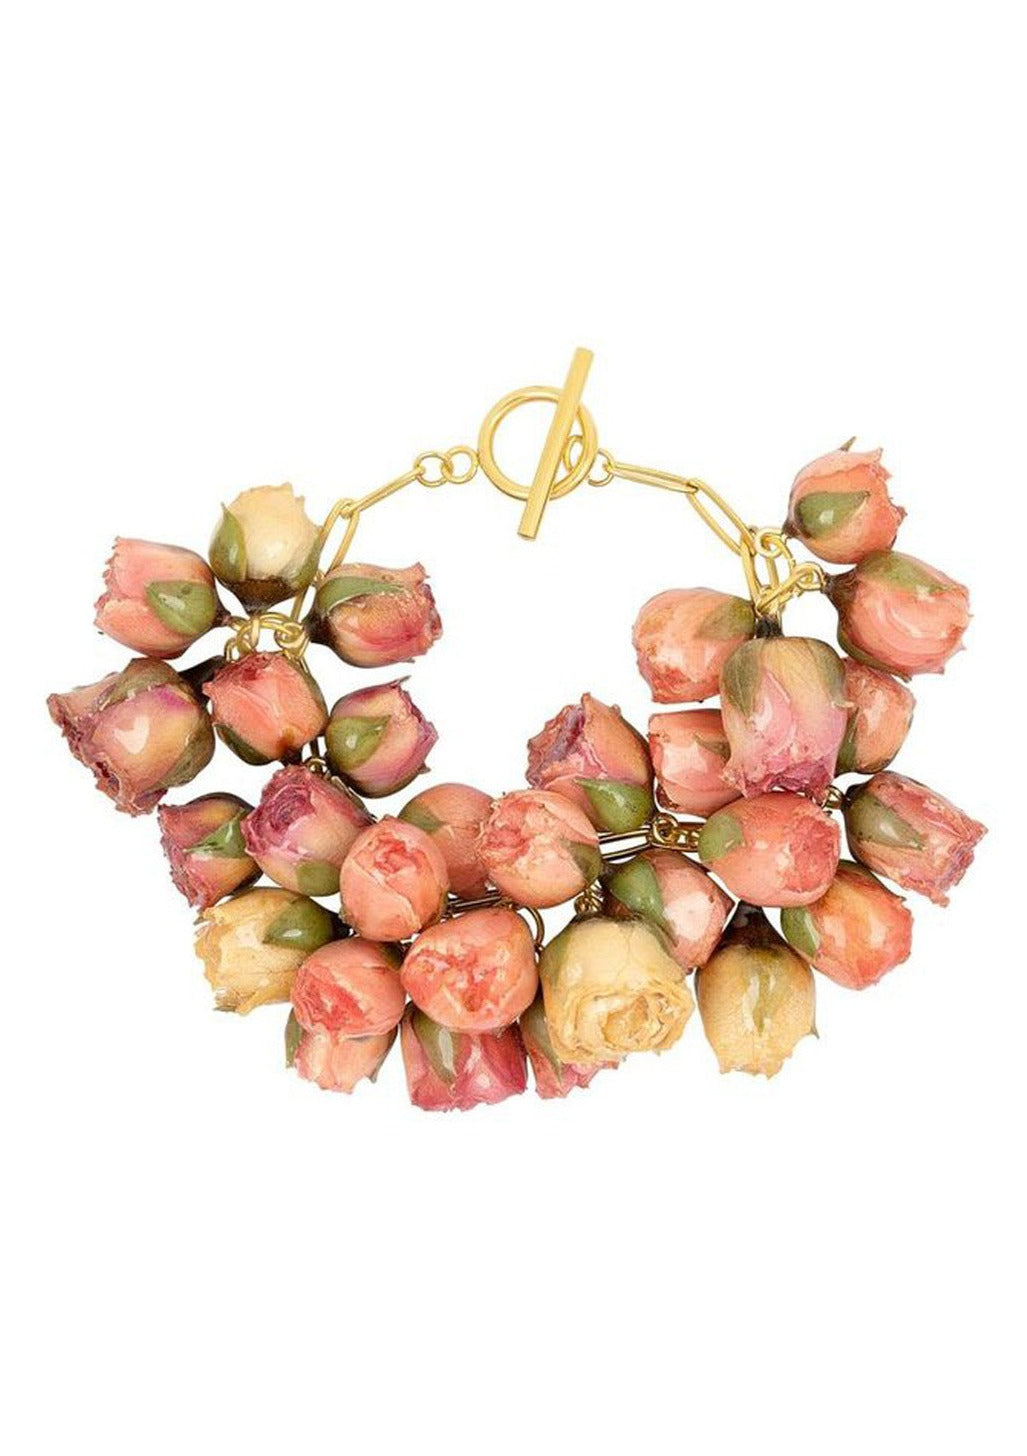 Over two dozen roses, suspended from a gold-plated stainless steel Albert chain.